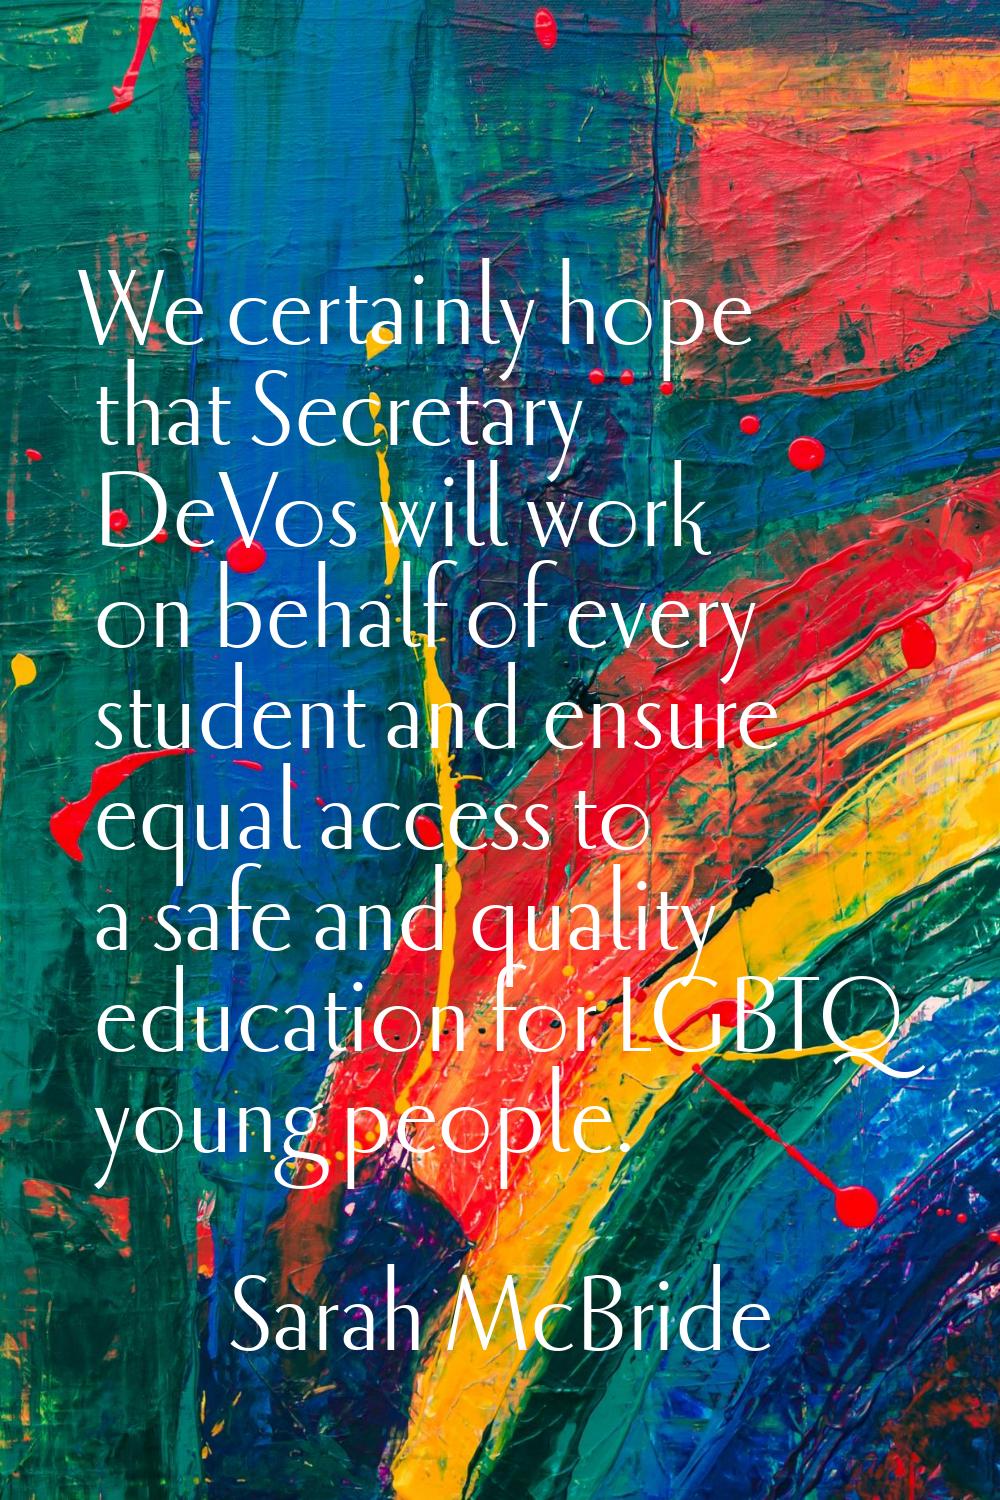 We certainly hope that Secretary DeVos will work on behalf of every student and ensure equal access